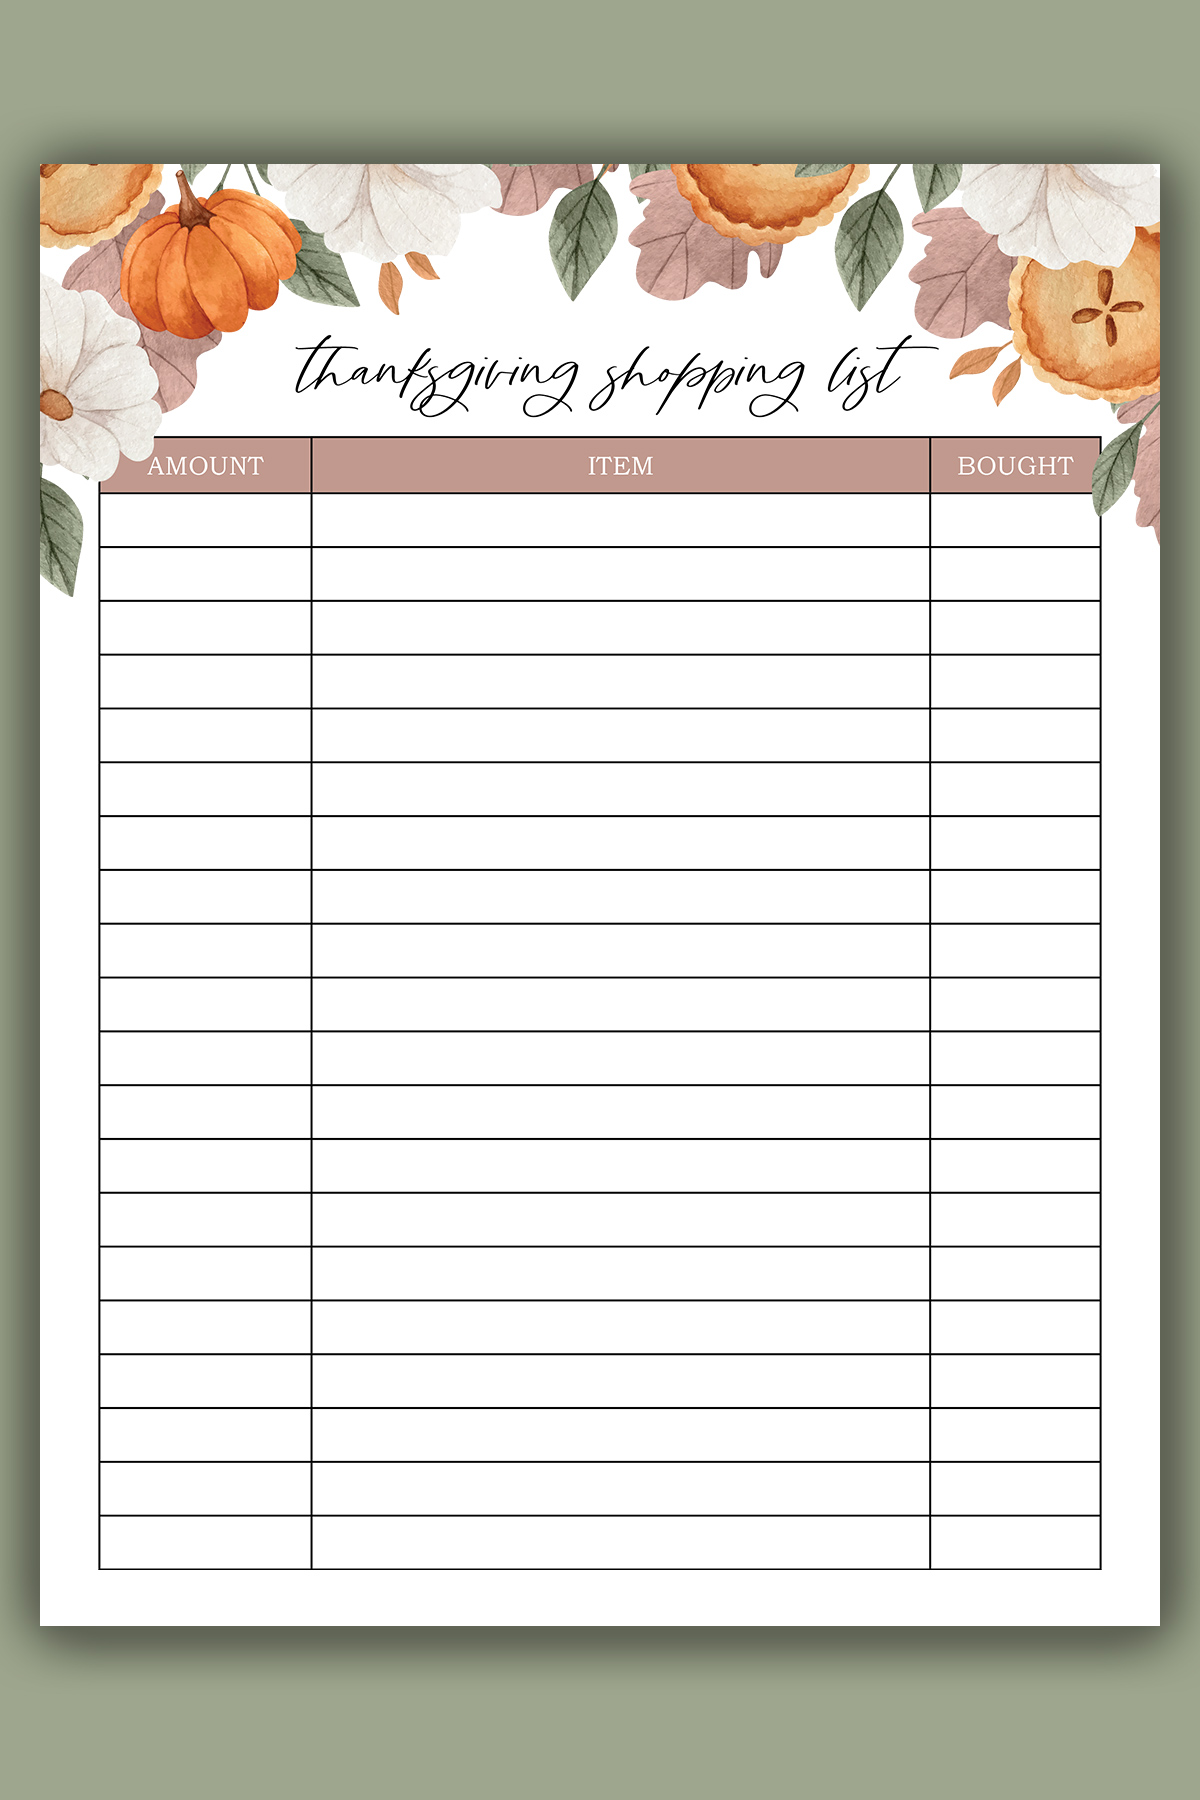 This image shows the free Thanksgiving shopping list you can get as part of the Thanksgiving shopping list printable, to do lists, and menu planner set at the end of this blog post.